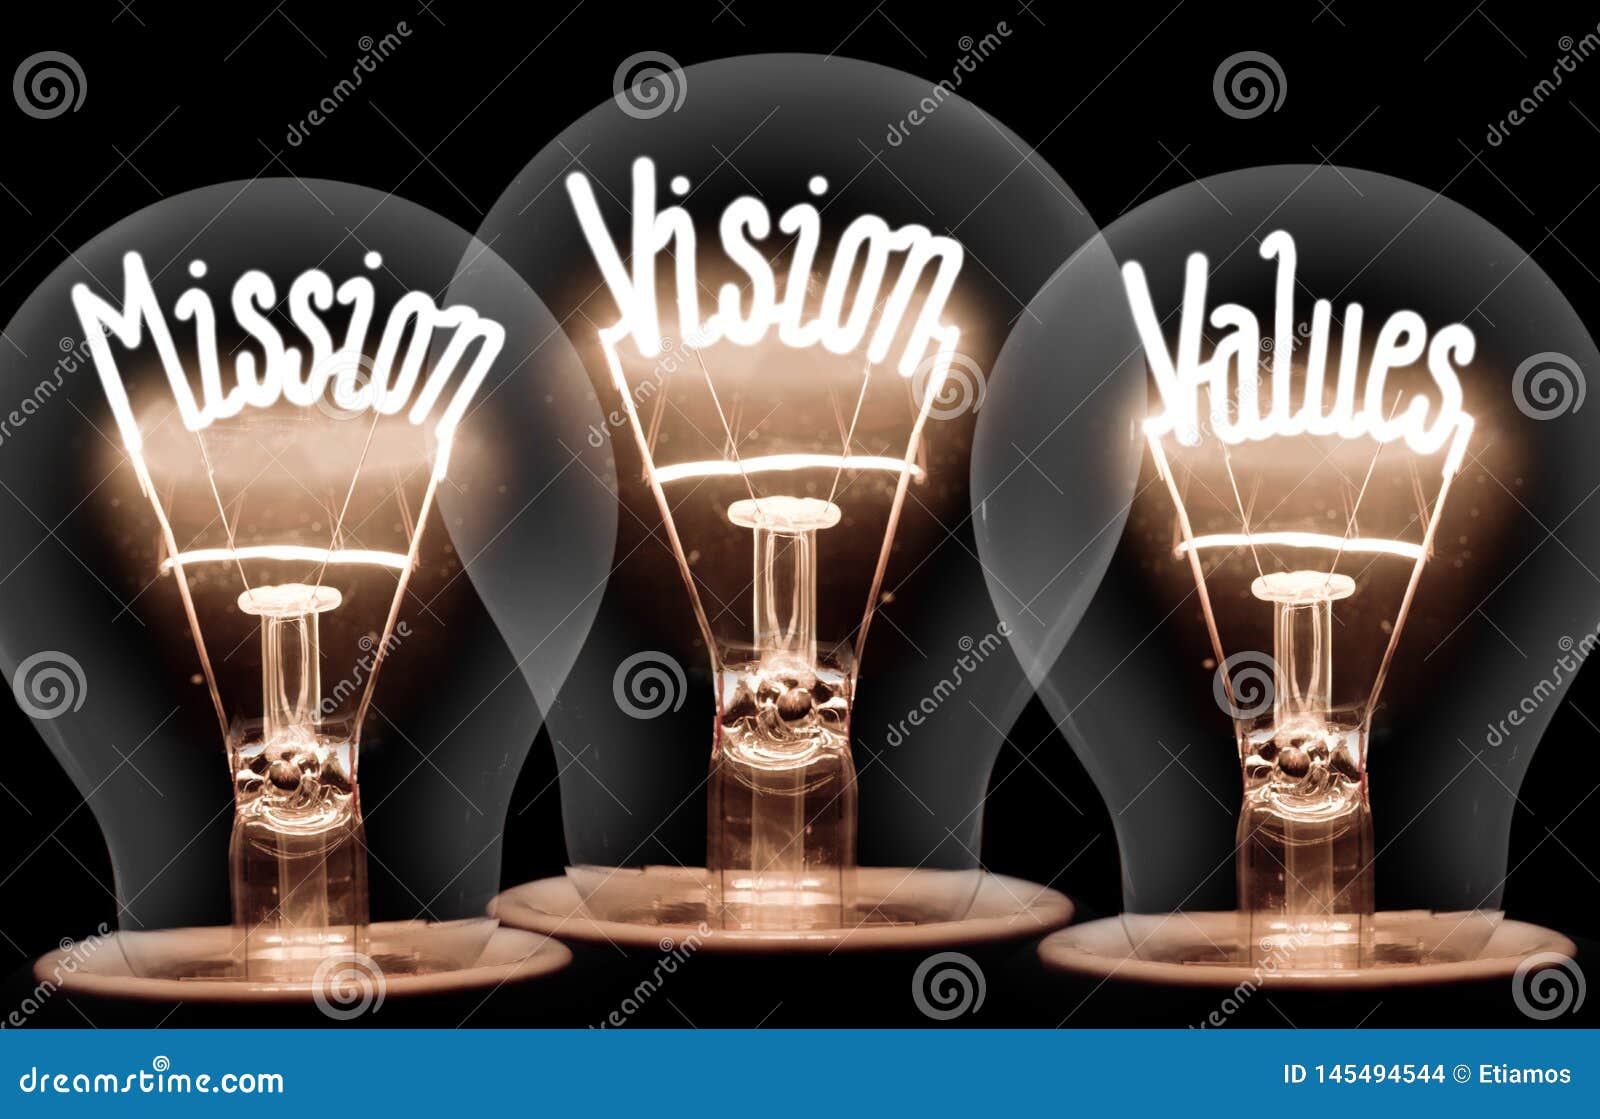 light bulbs with mission, vision, values concept